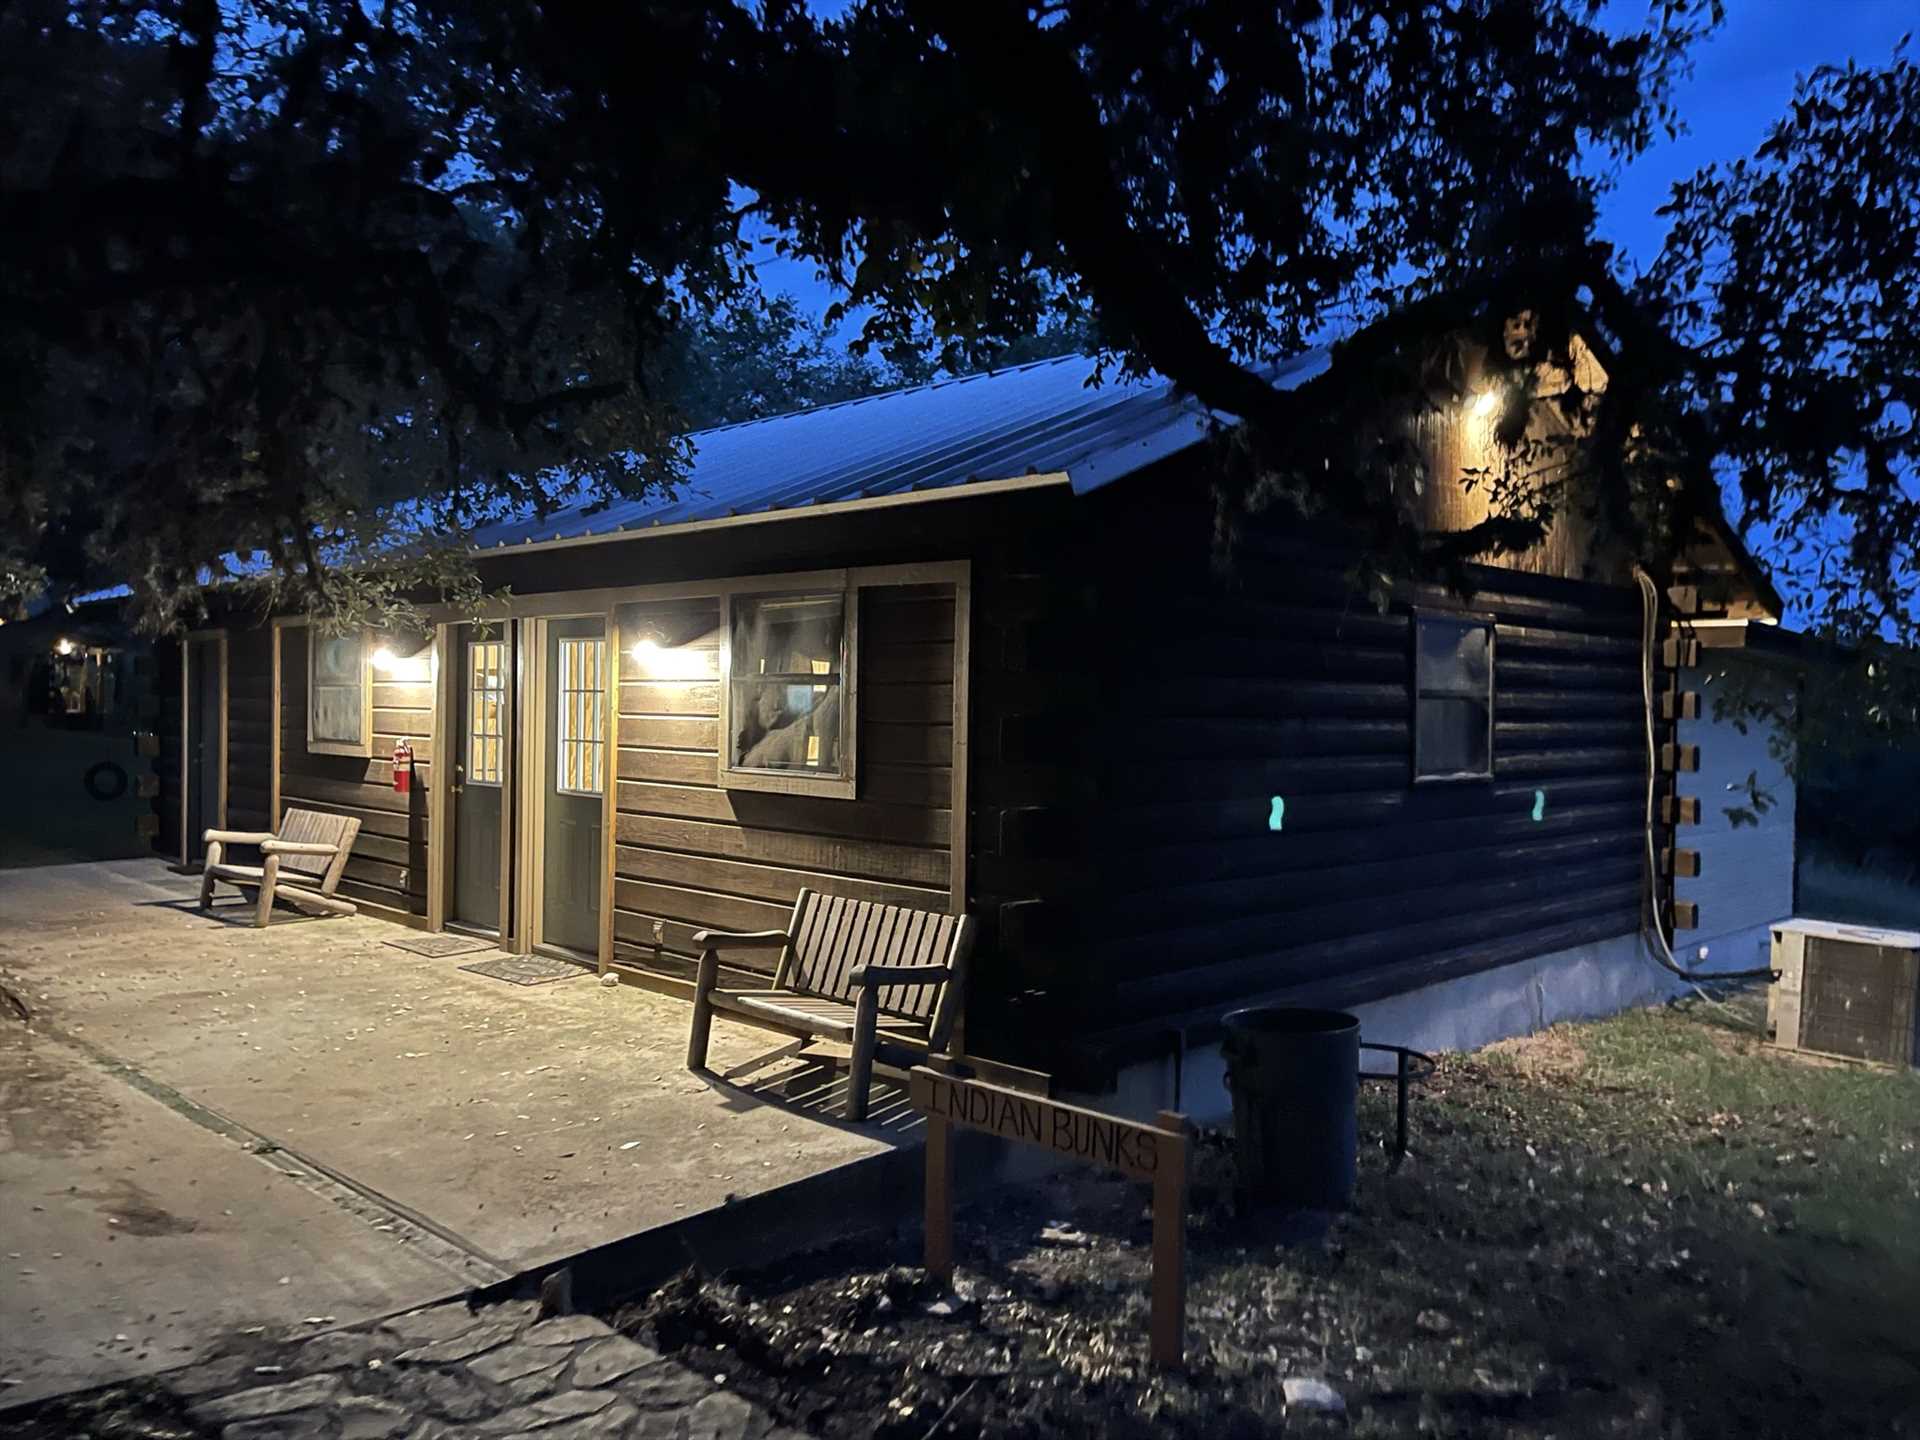                                                 The final two guest cabins at the Retreat are the Cowboy and Indian bunkhouses, which combined sleep up to twenty guests on twin bunks.